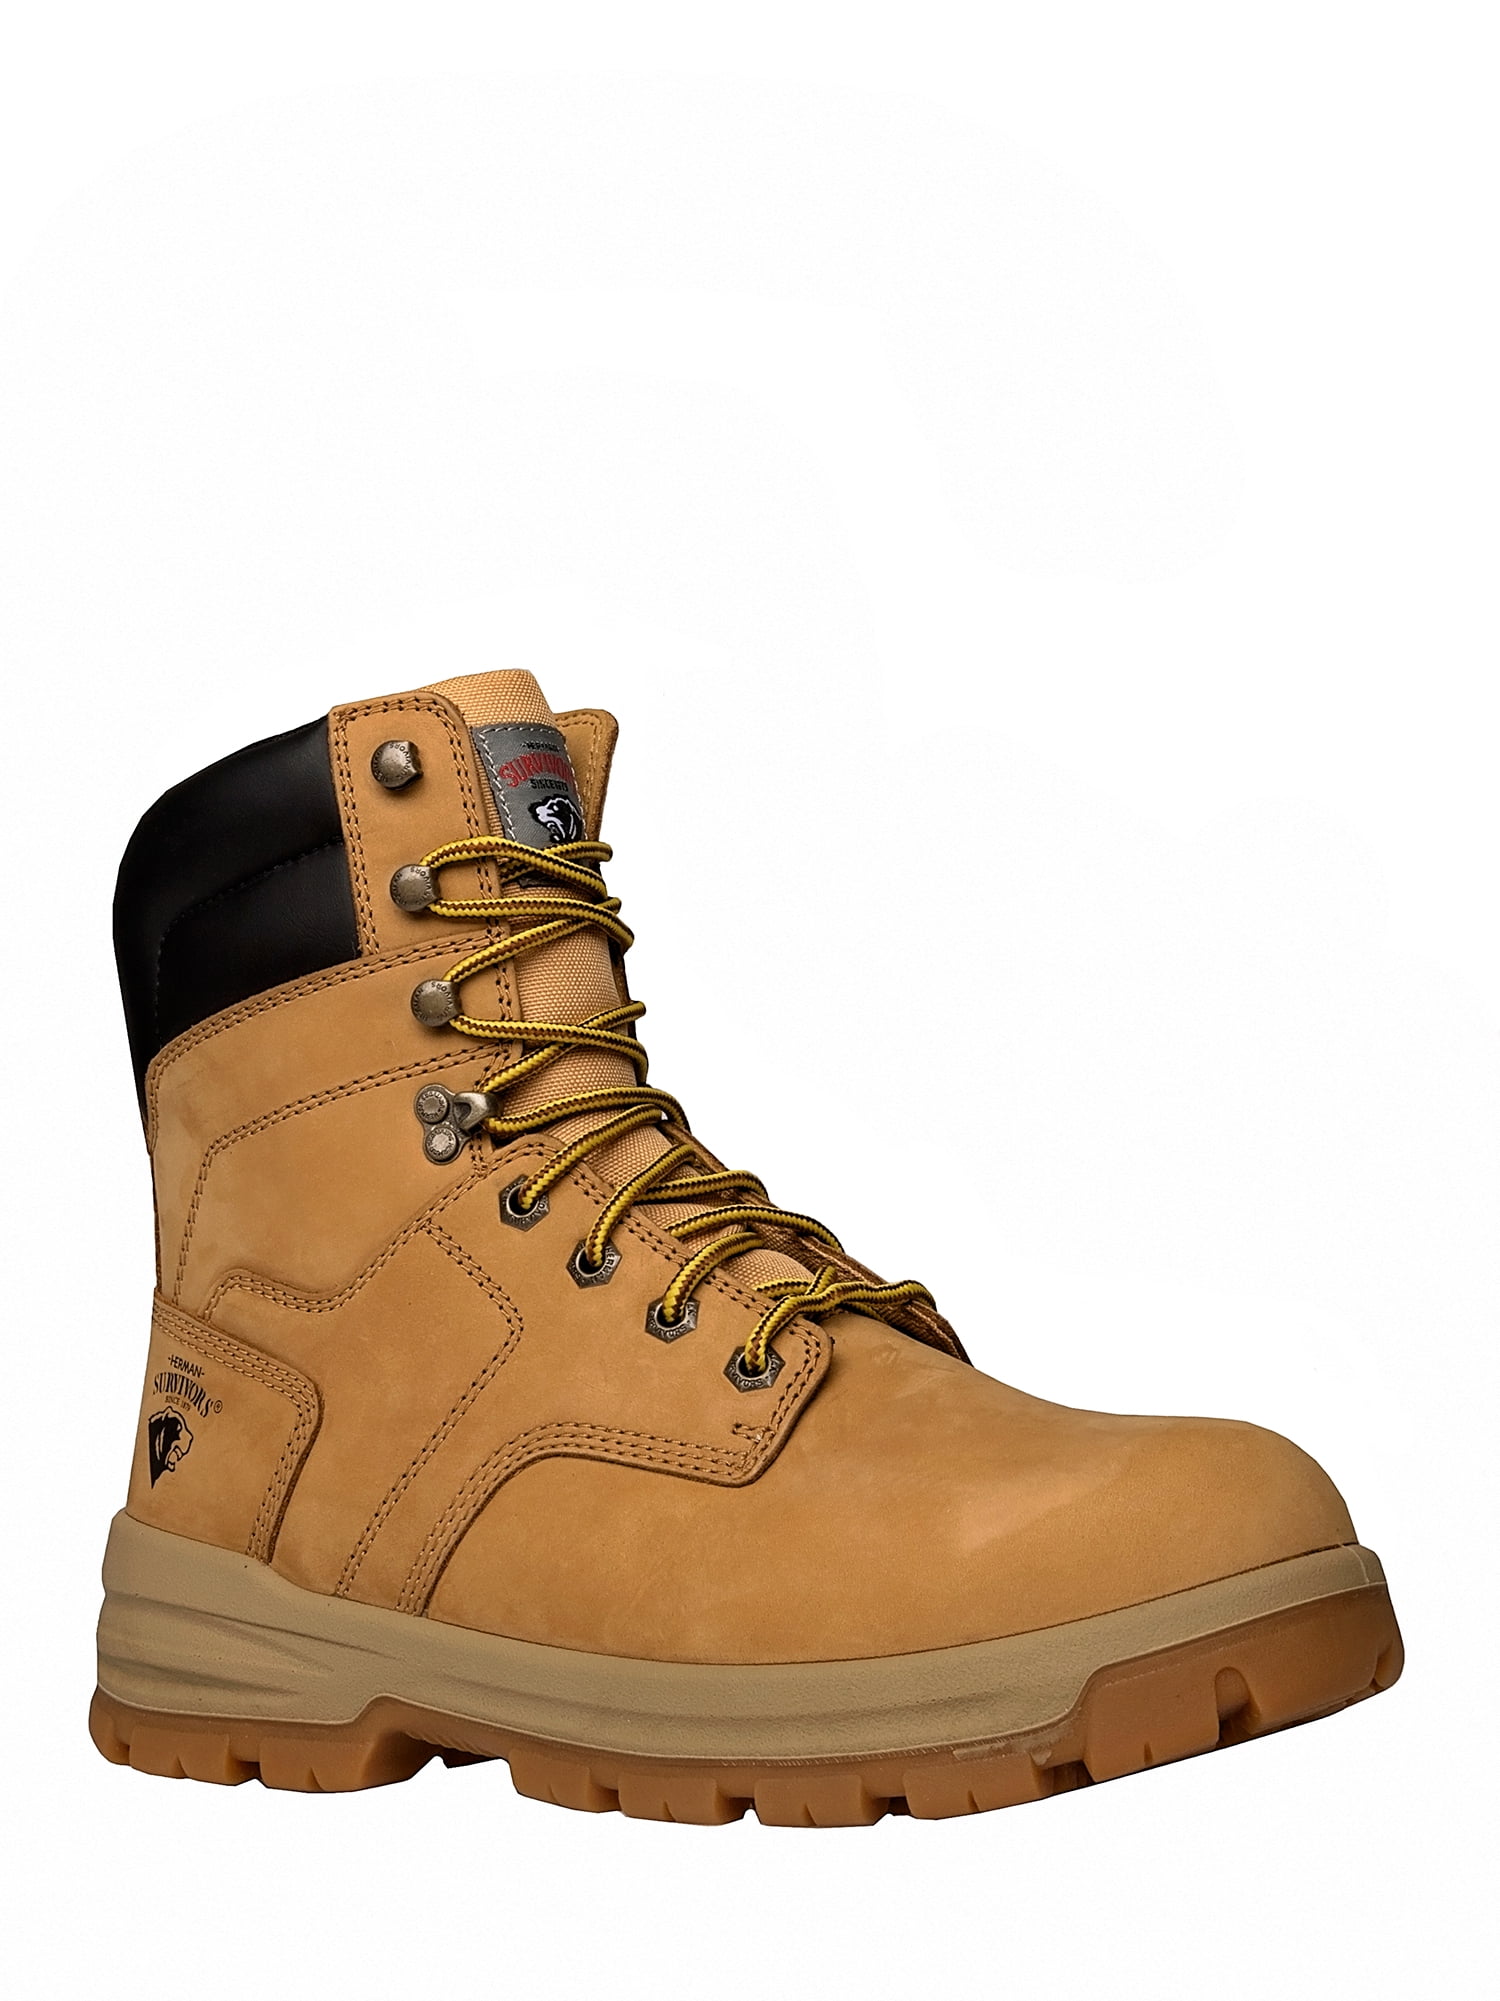 Grizzly Steel Toe Work Boot 